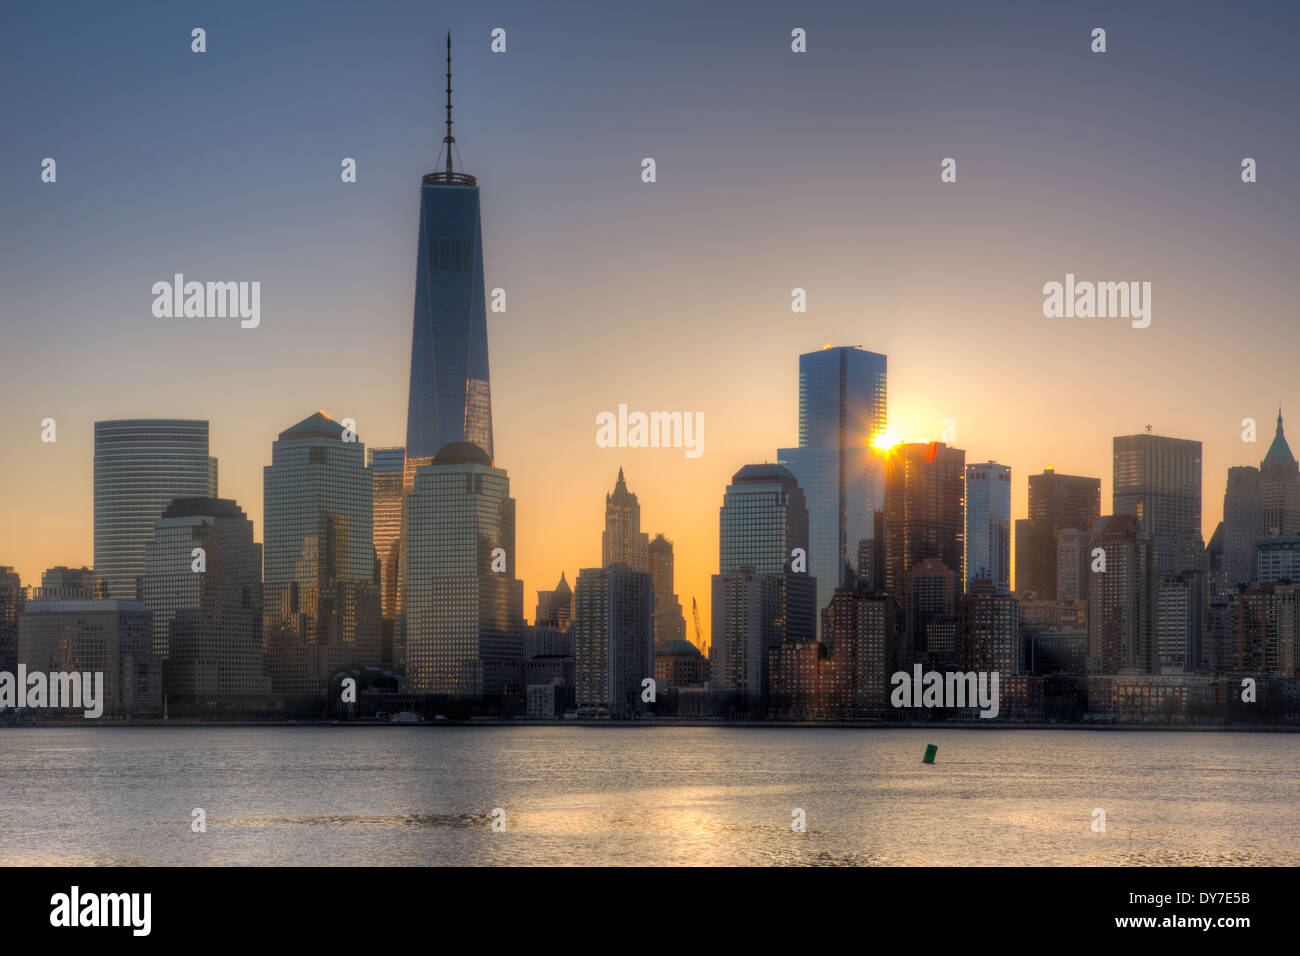 The sun rises next to 4 World Trade Center as the Freedom Tower (1 WTC) stands tall nearby in New York City. Stock Photo